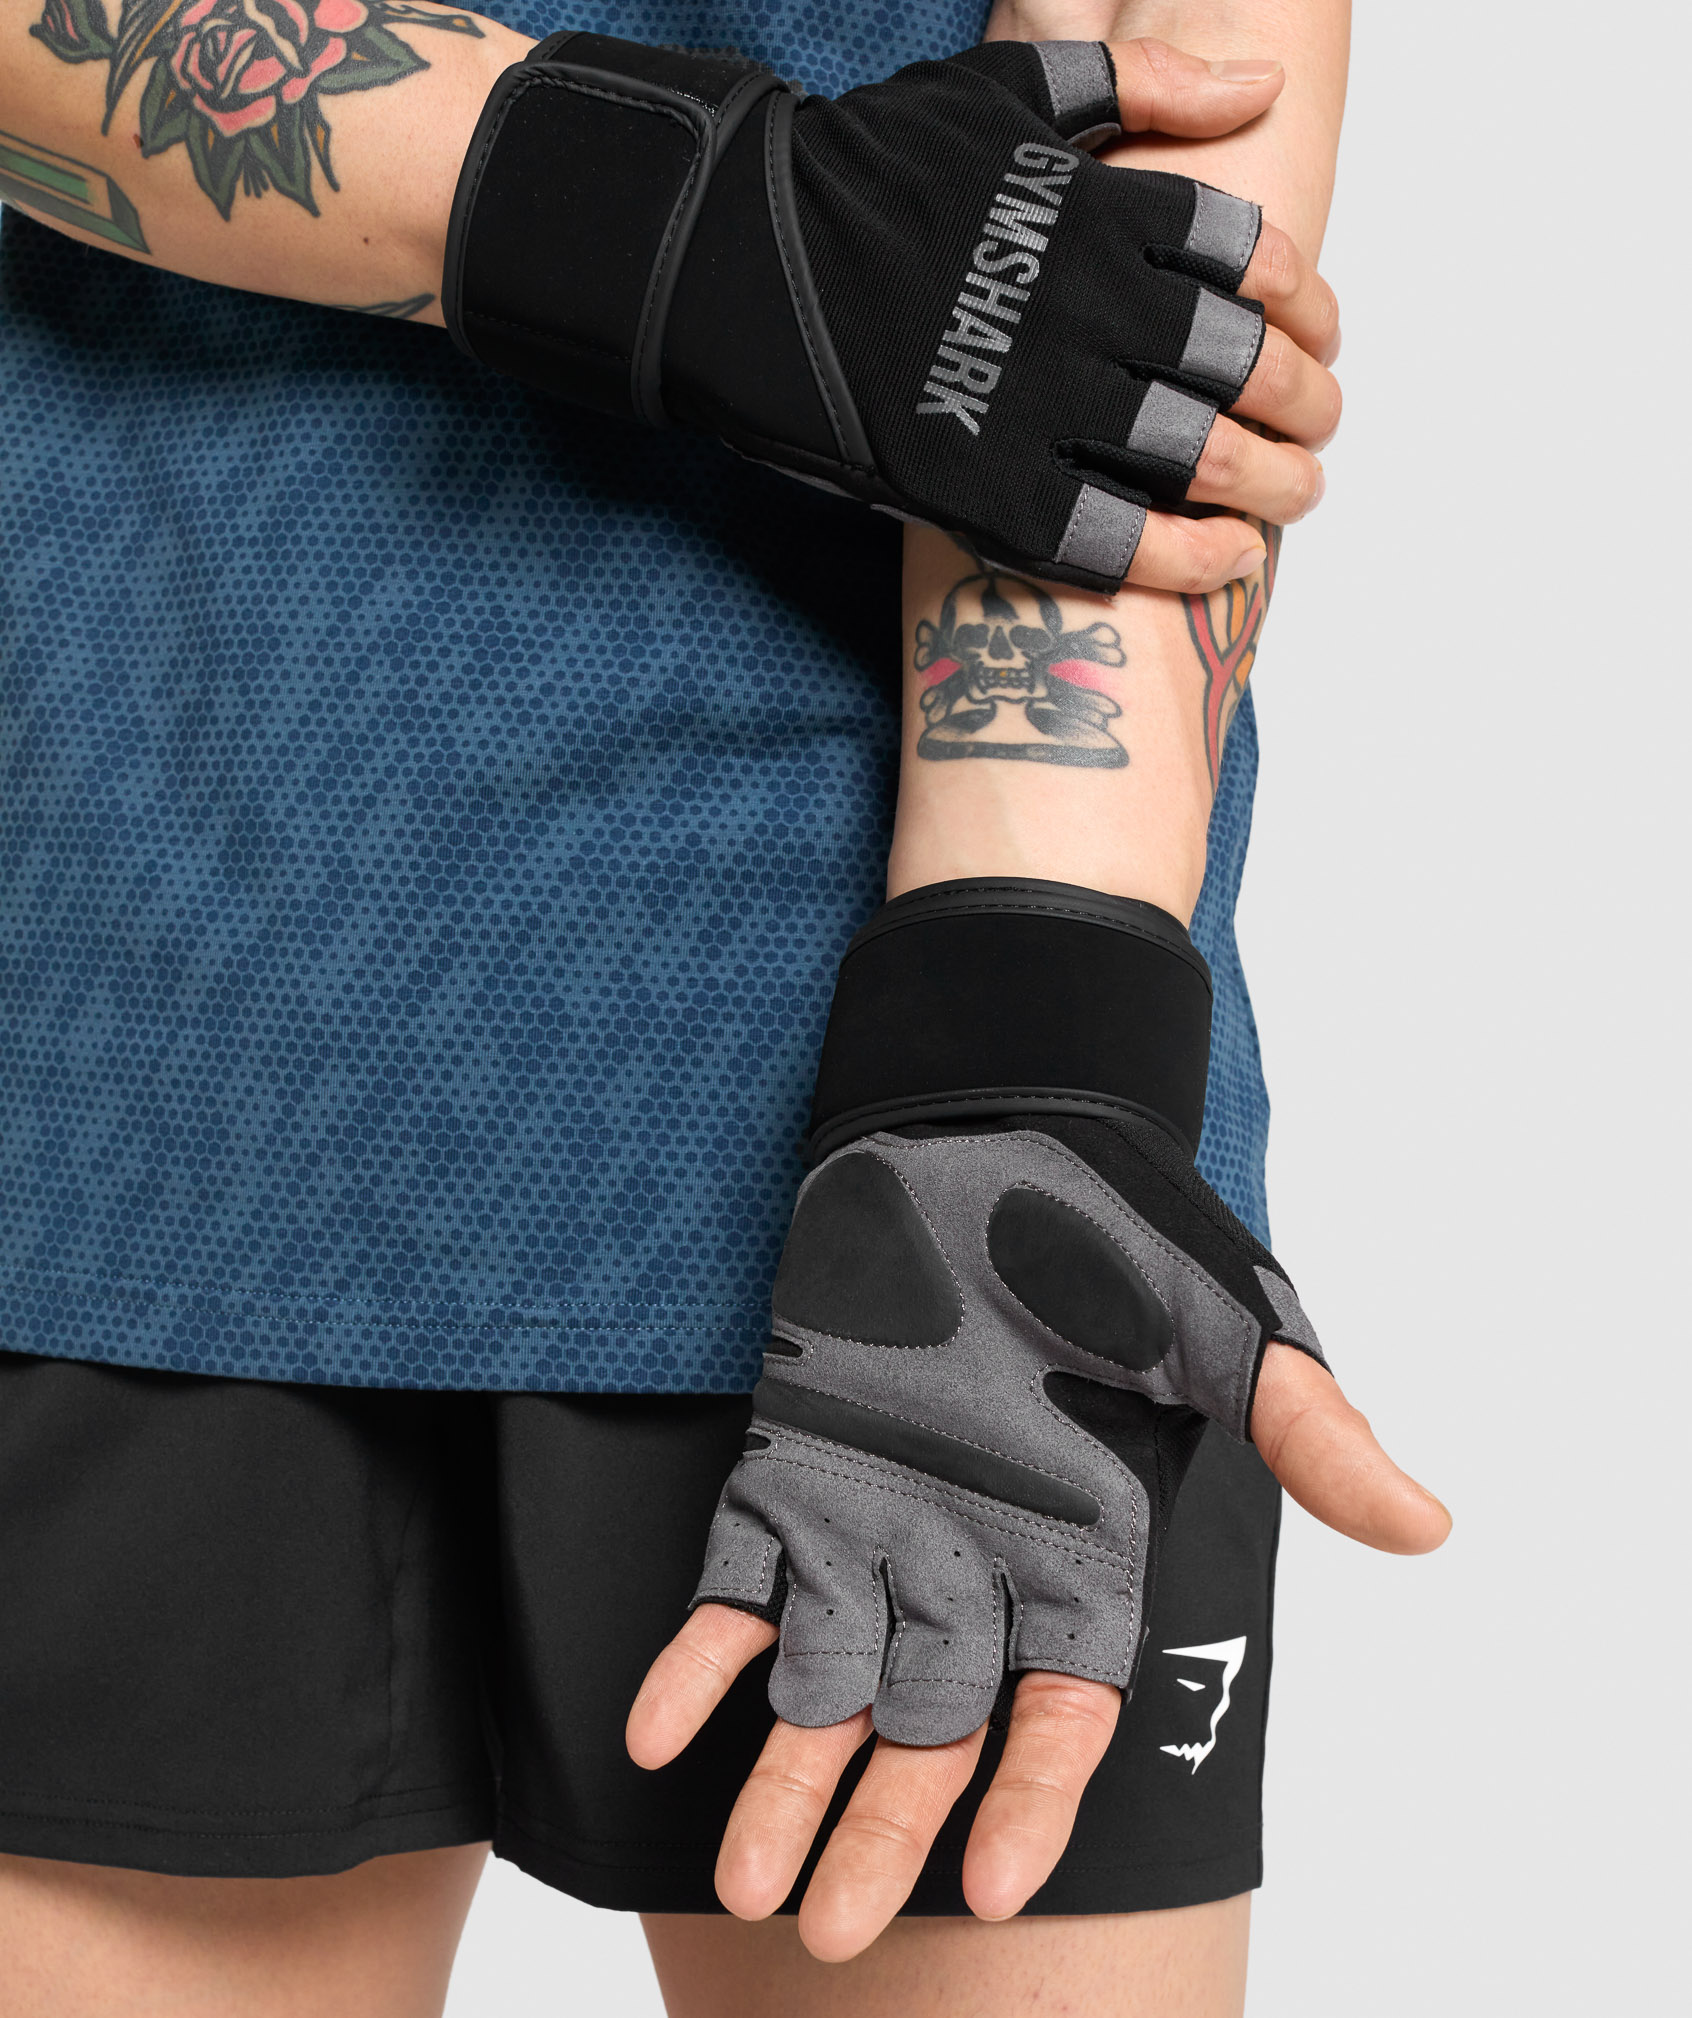 Should You Wear Workout Gloves? Pros & Cons To Consider